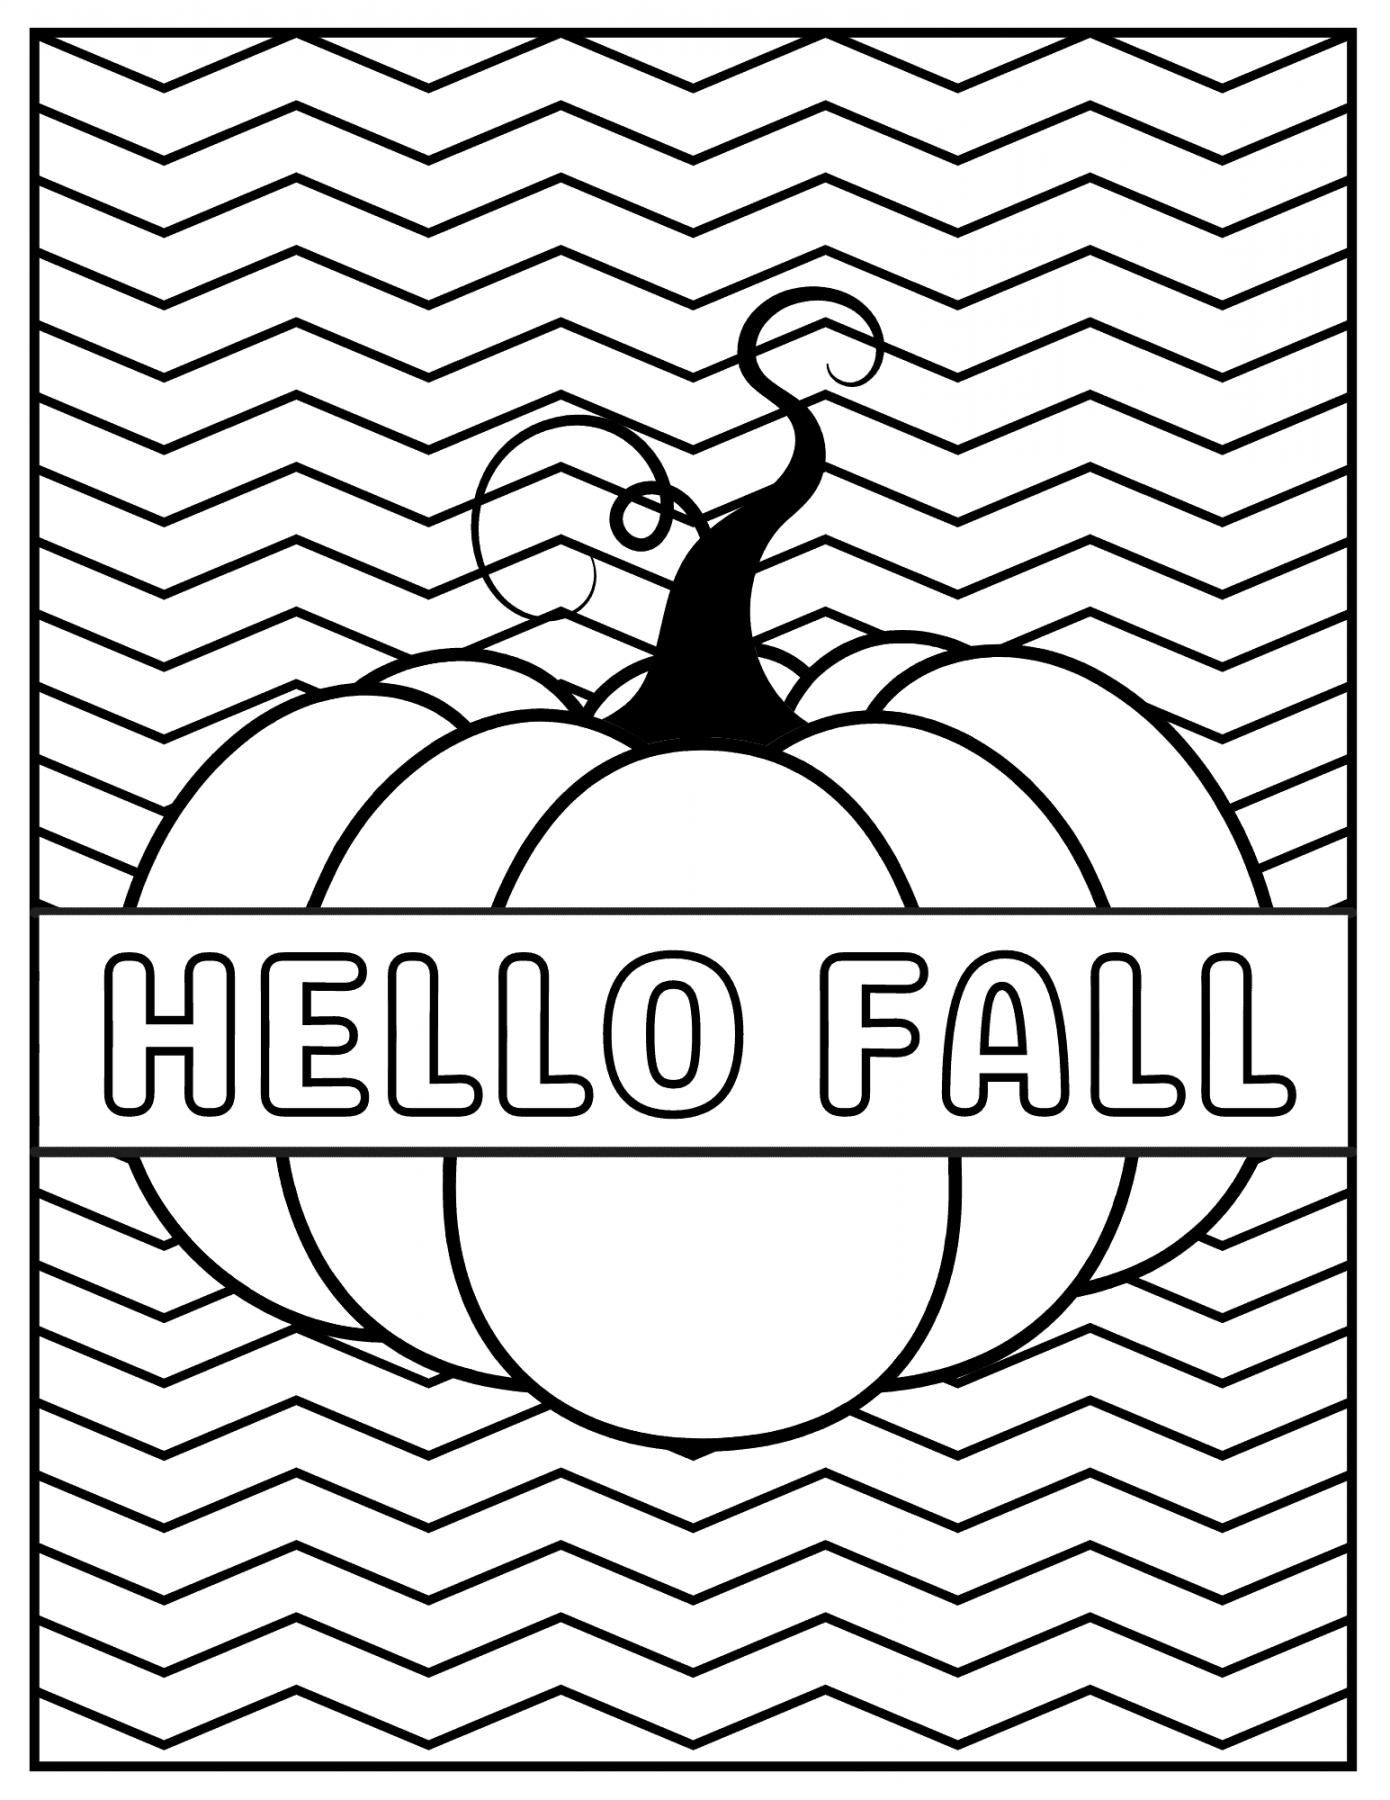 Free Printable Fall Coloring Pages - Printable -  Free Printable Fall Coloring Pages - Prudent Penny Pincher